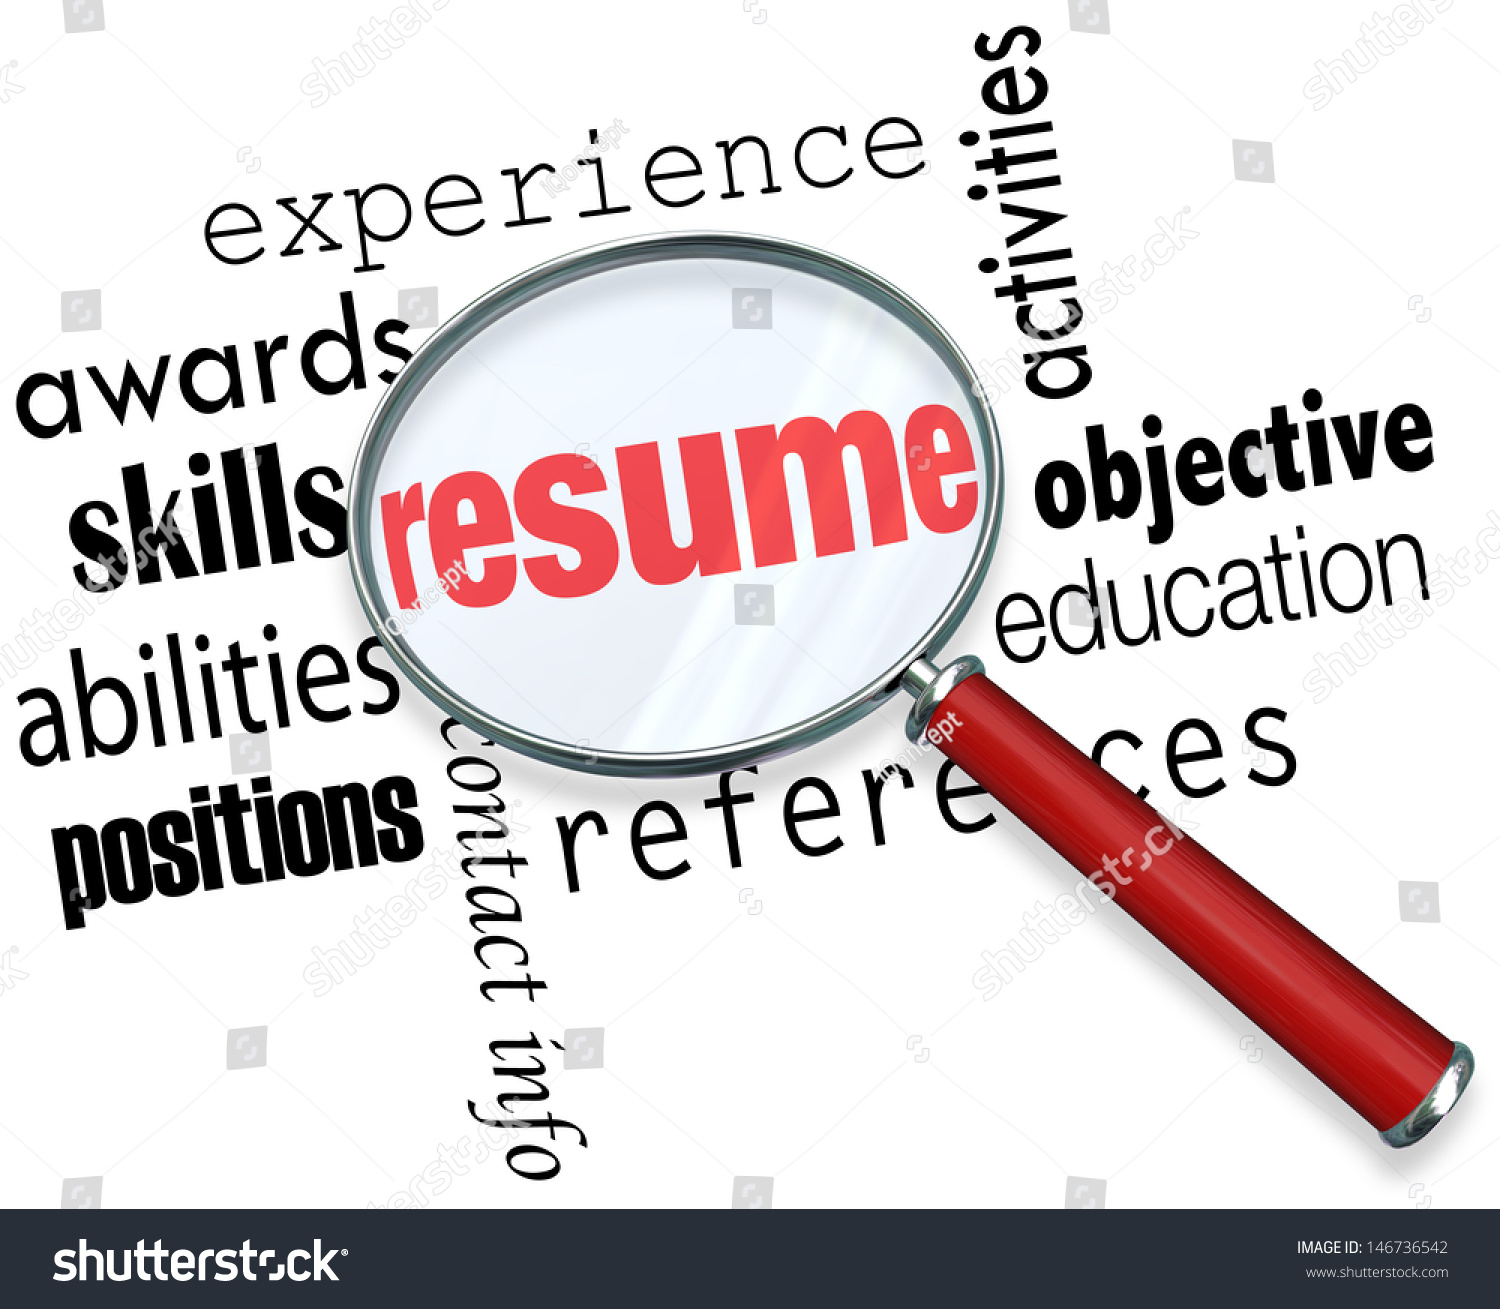 magnifying glass over word resume surrounded stock illustration 146736542